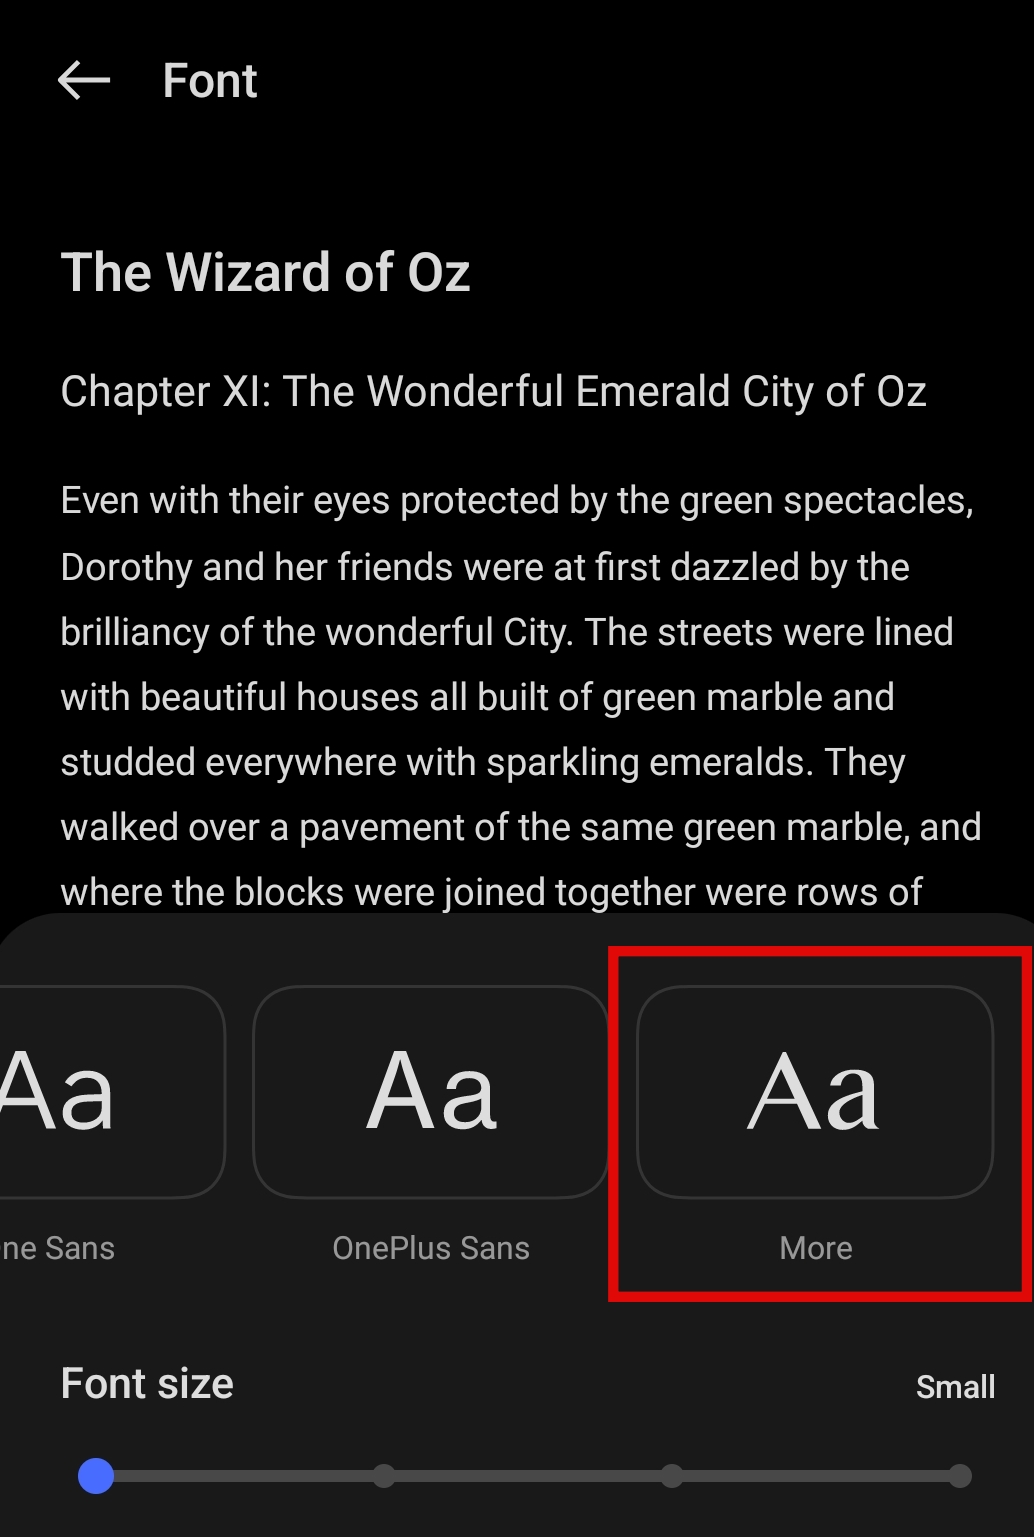 More option in Fonts